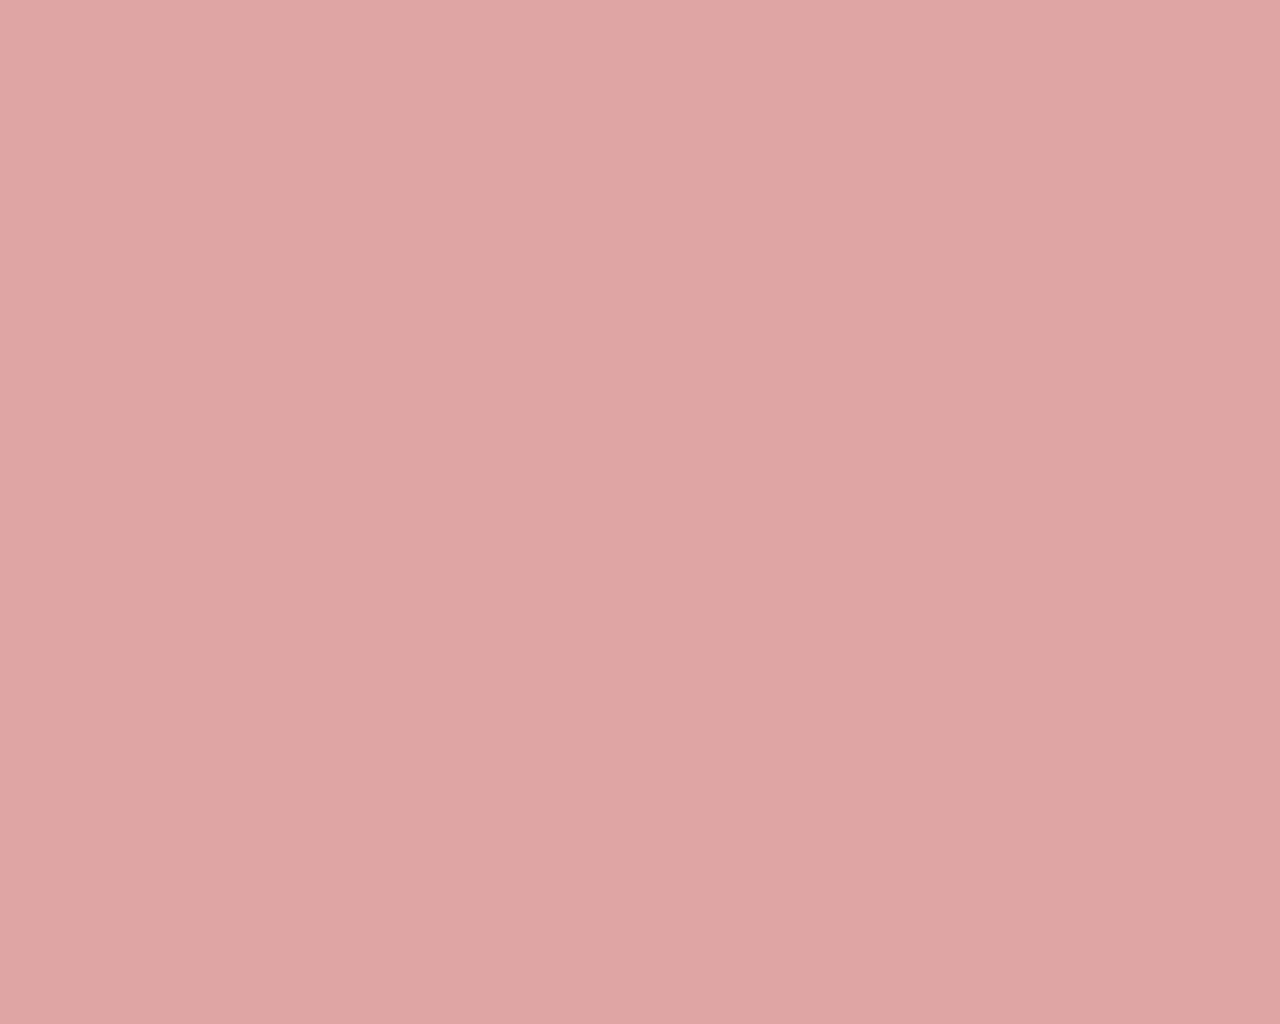 1280x1024 Pastel Pink Solid Color Backgrounds.